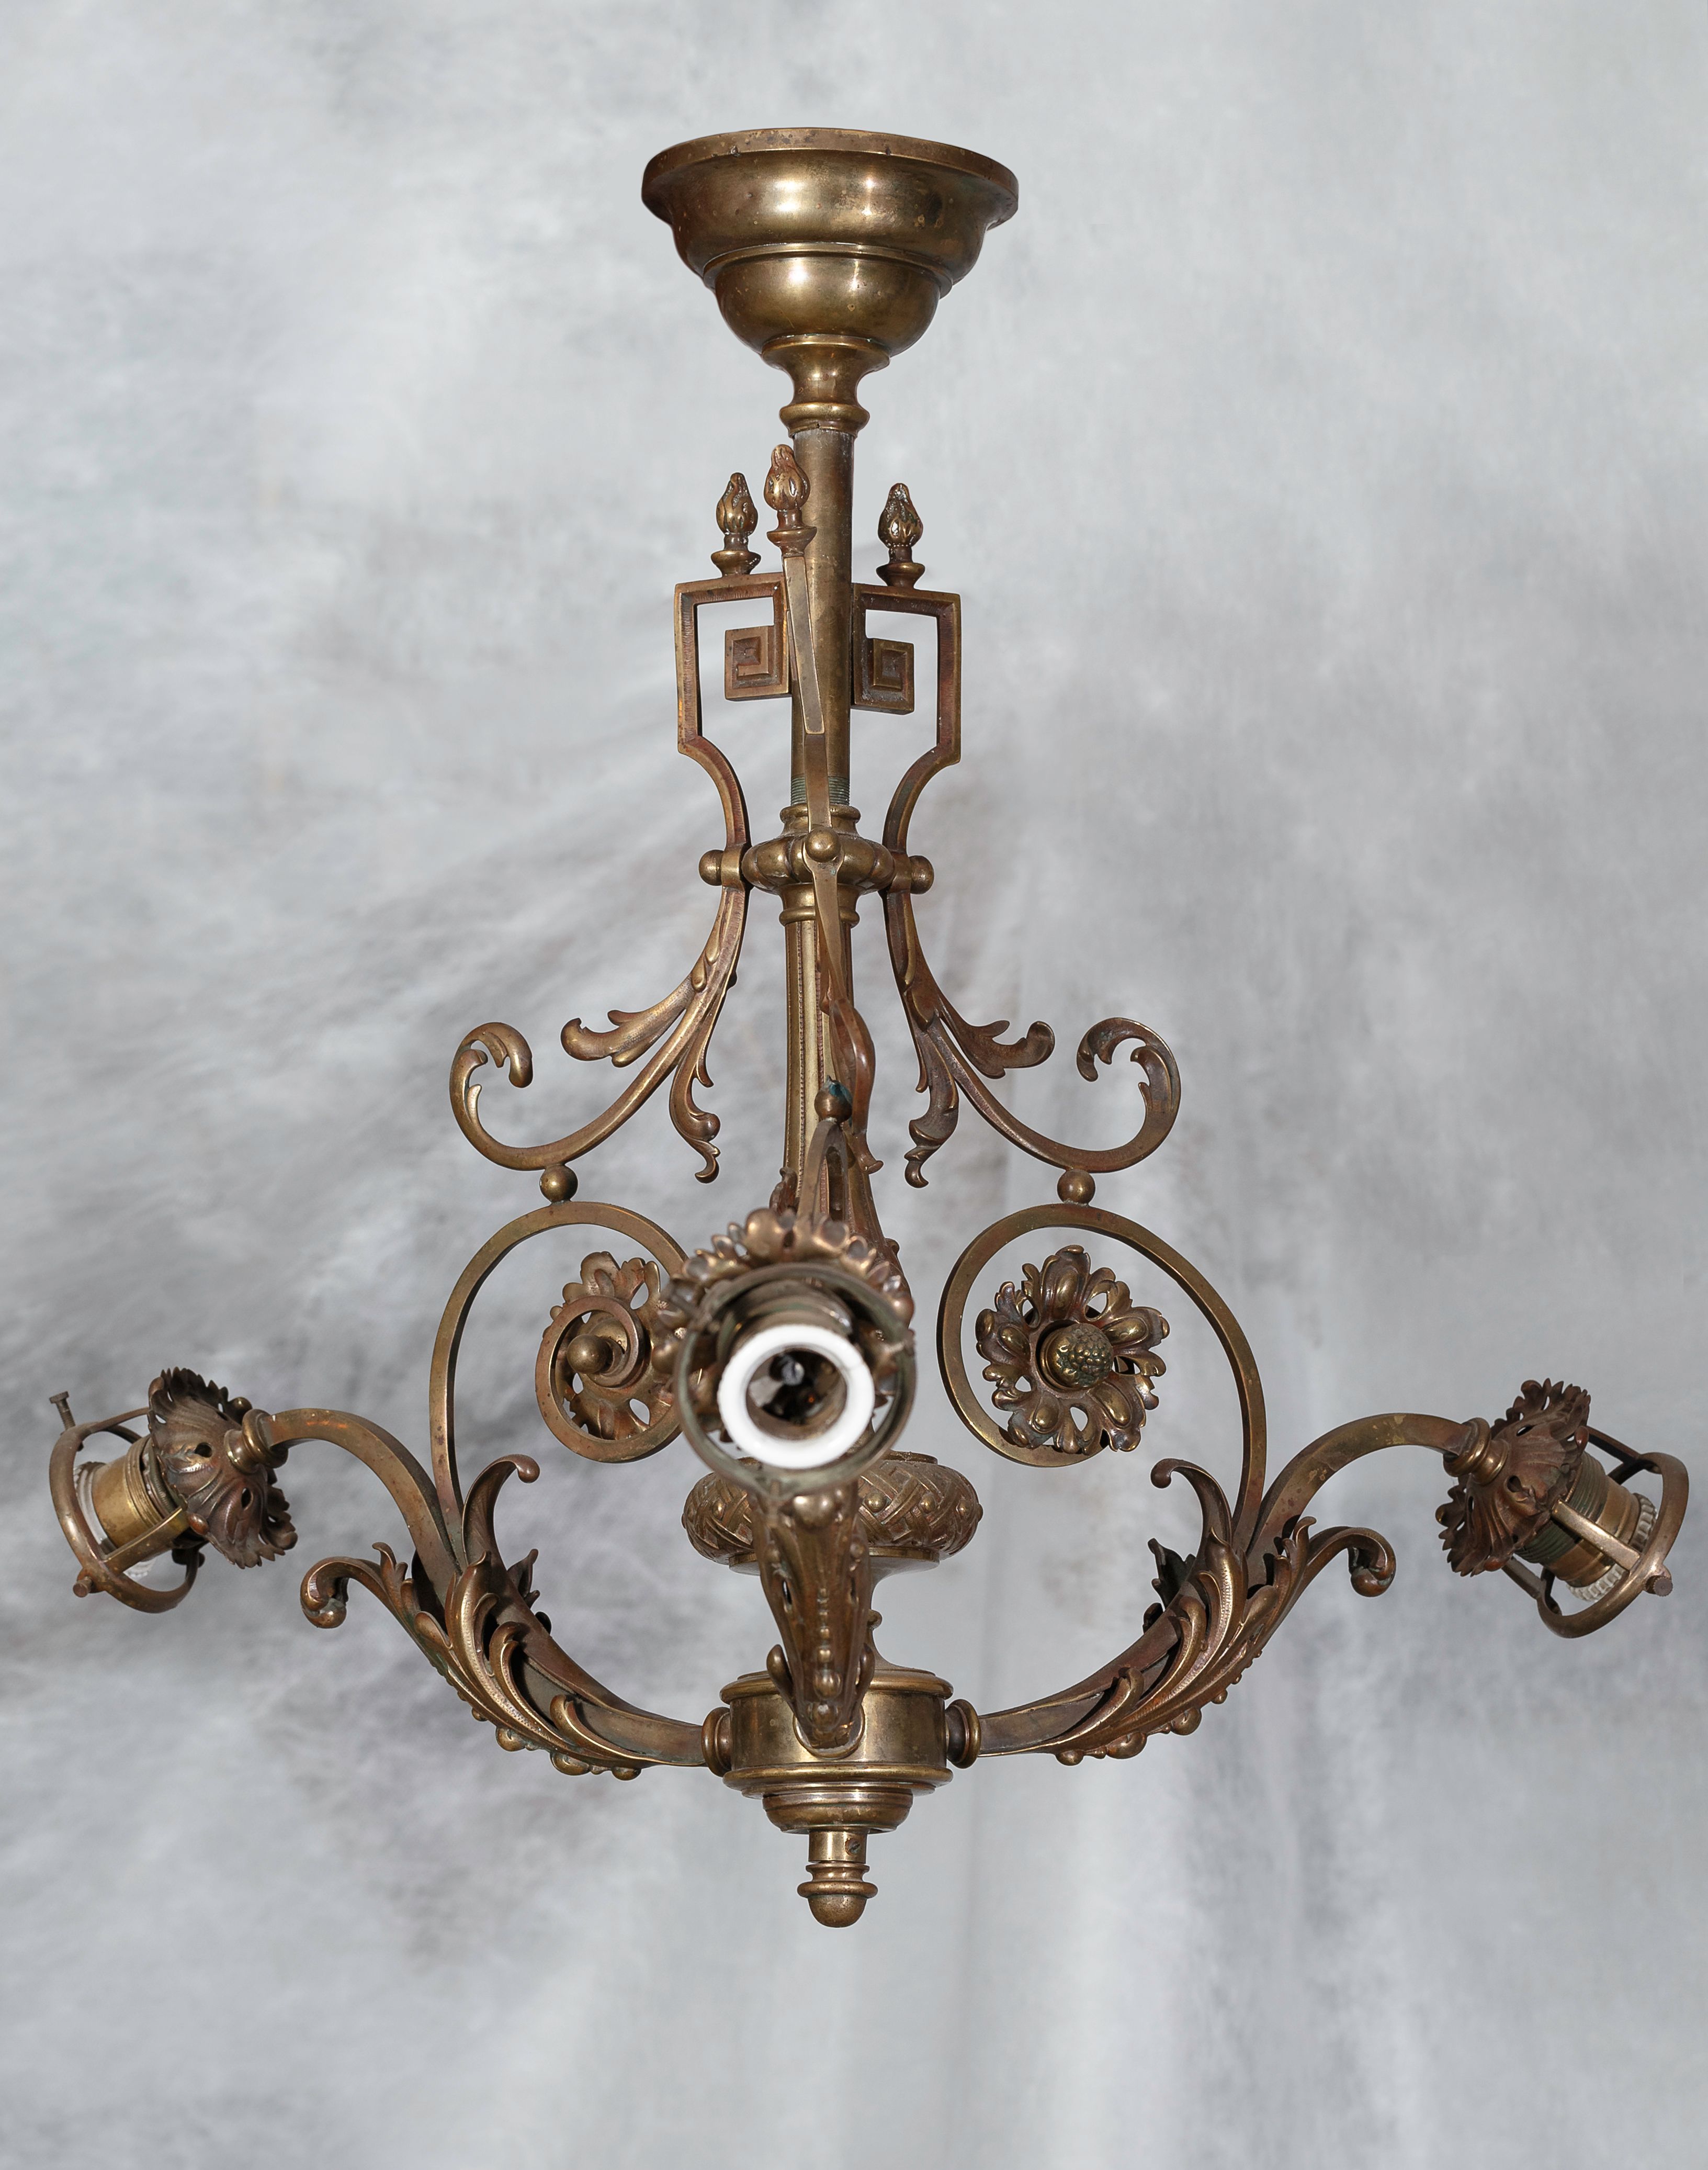 Chandelier, the late 19th – Q1 of the 20th century, the National M. K. Čiurlionis Museum of Art, Tt-10327. Photo by Povilas Jarmala, 2019